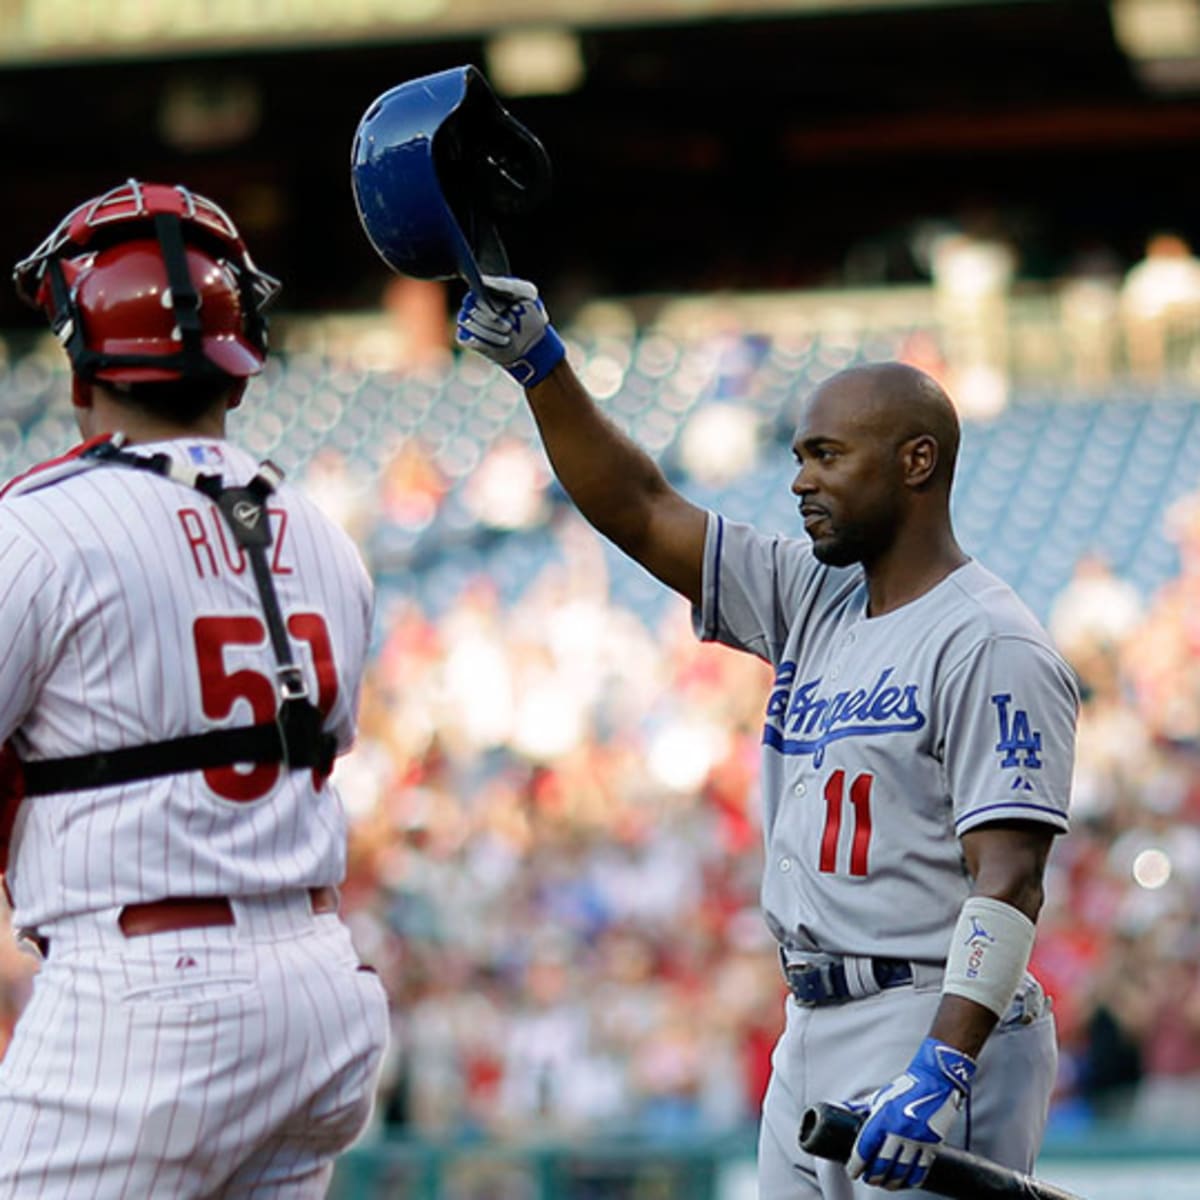 Video: Jimmy Rollins gets standing ovation in return to